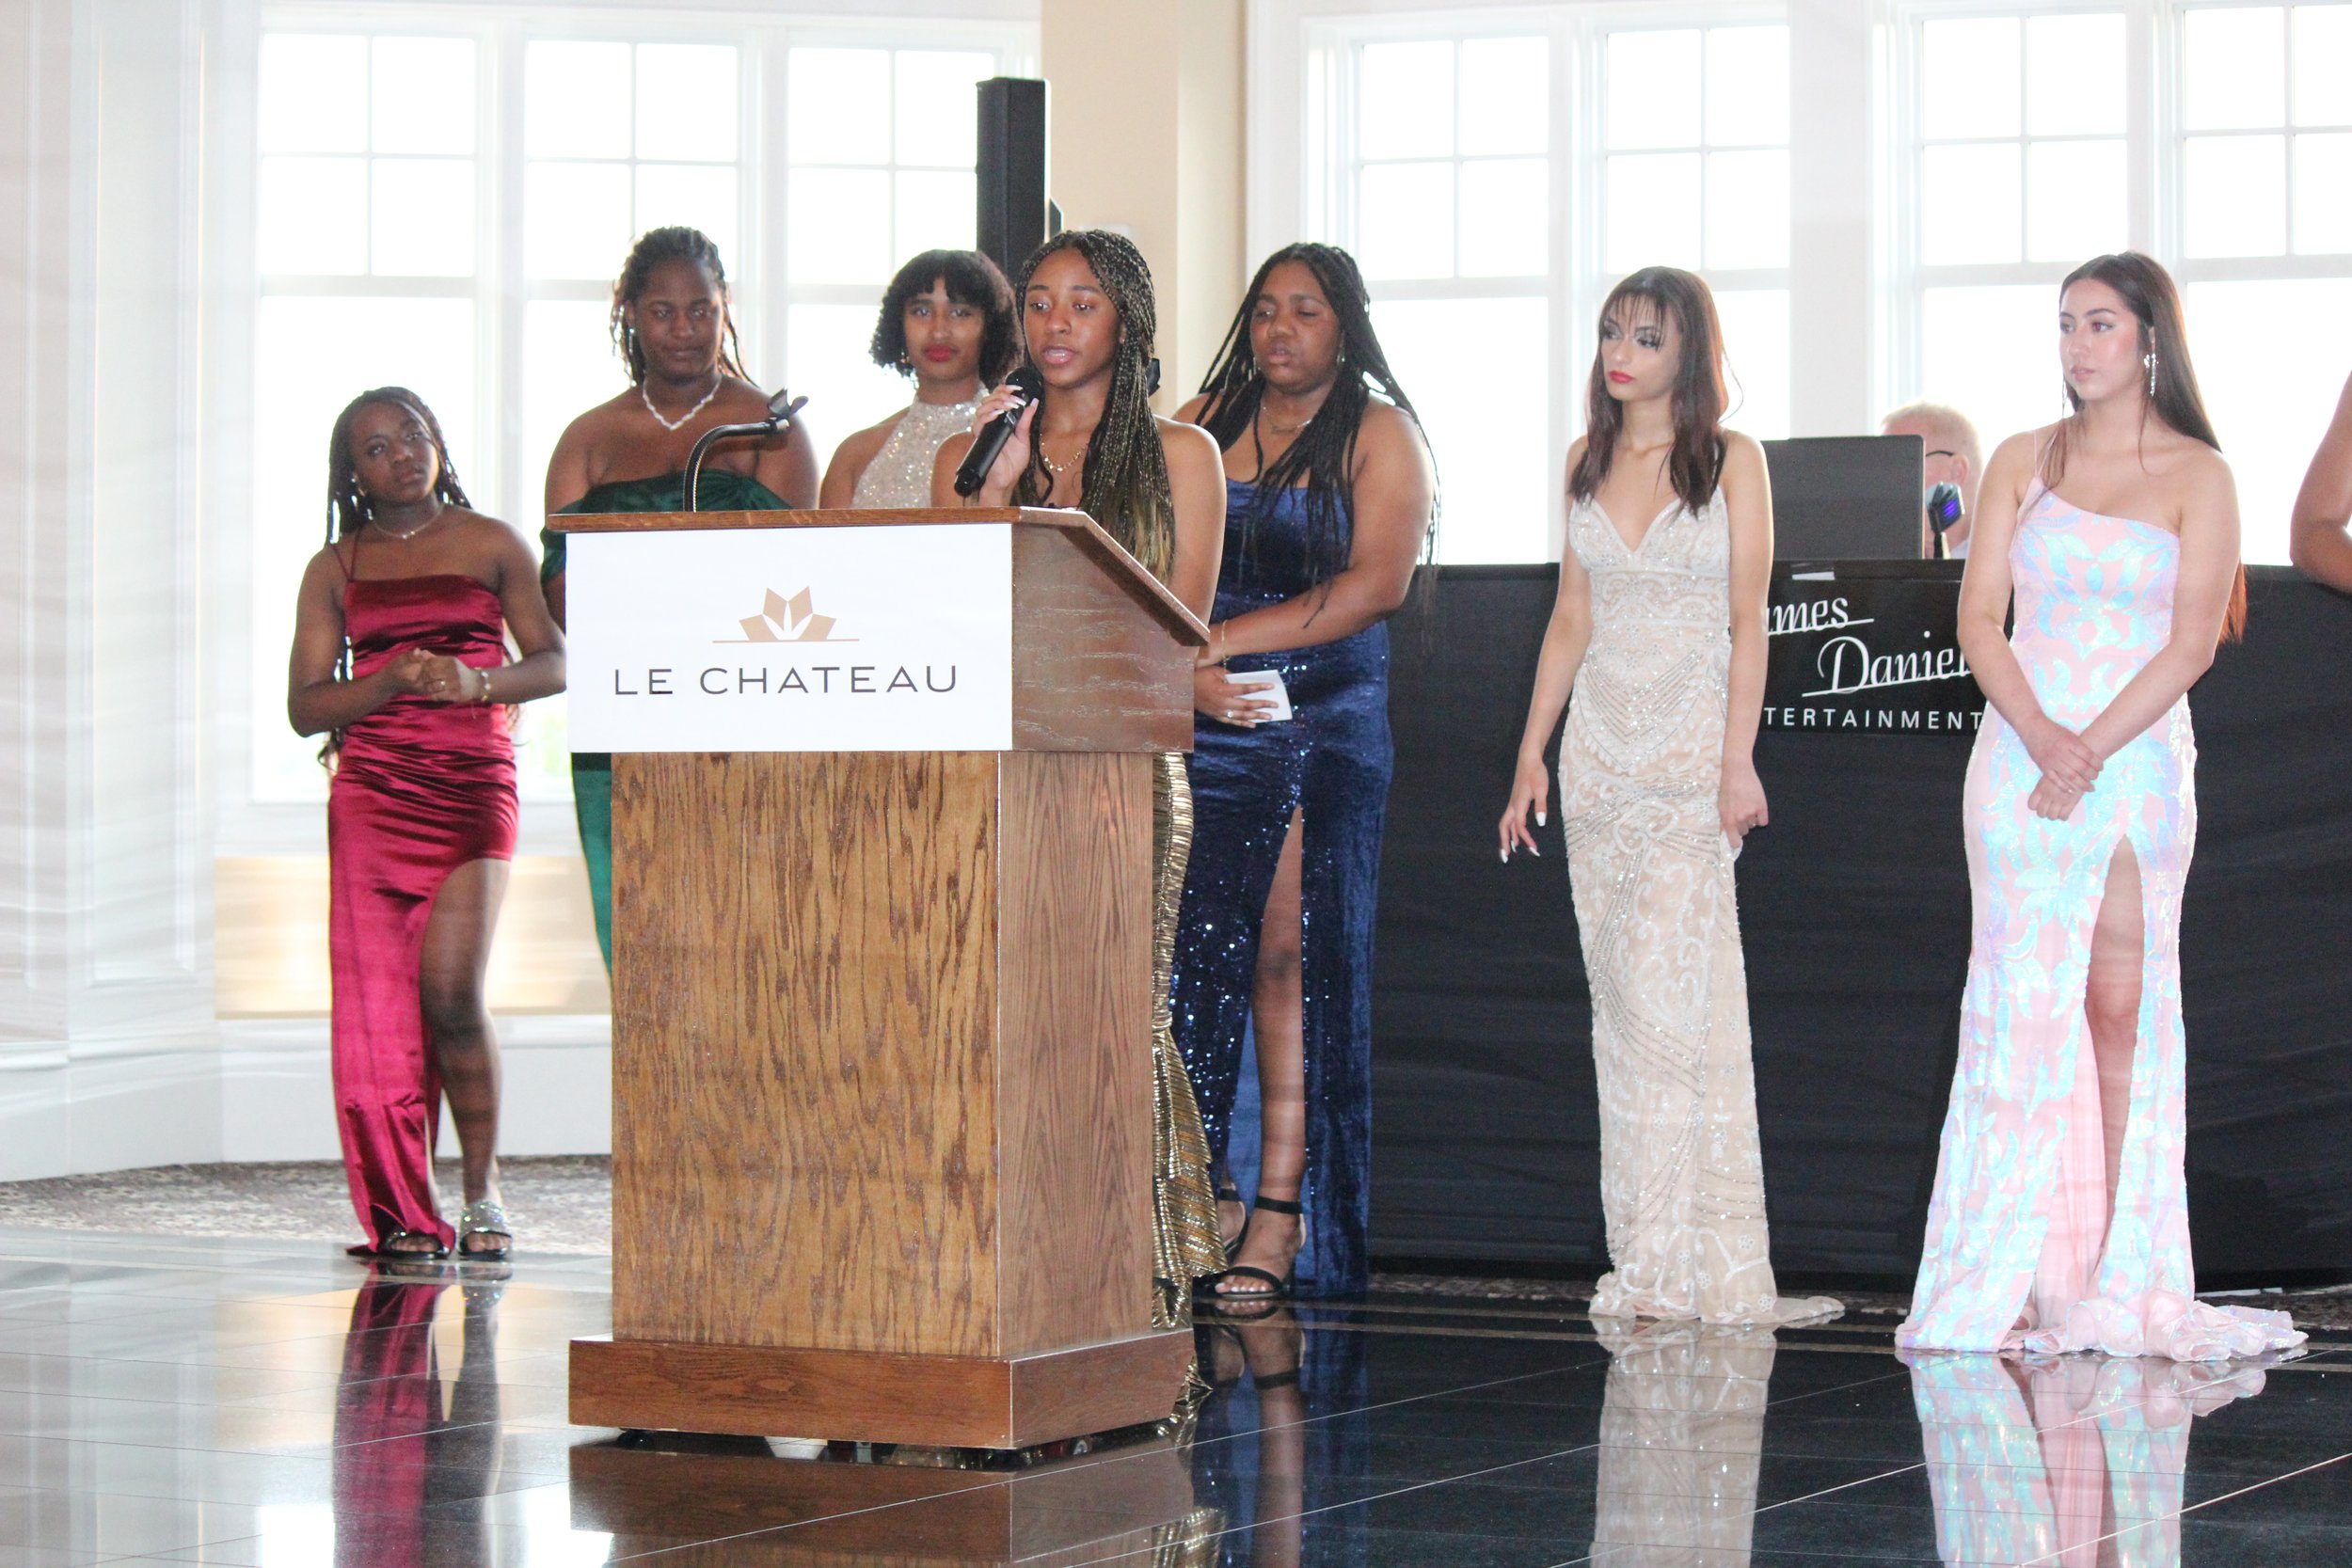 Speaking at our Annual Spotlight Gala